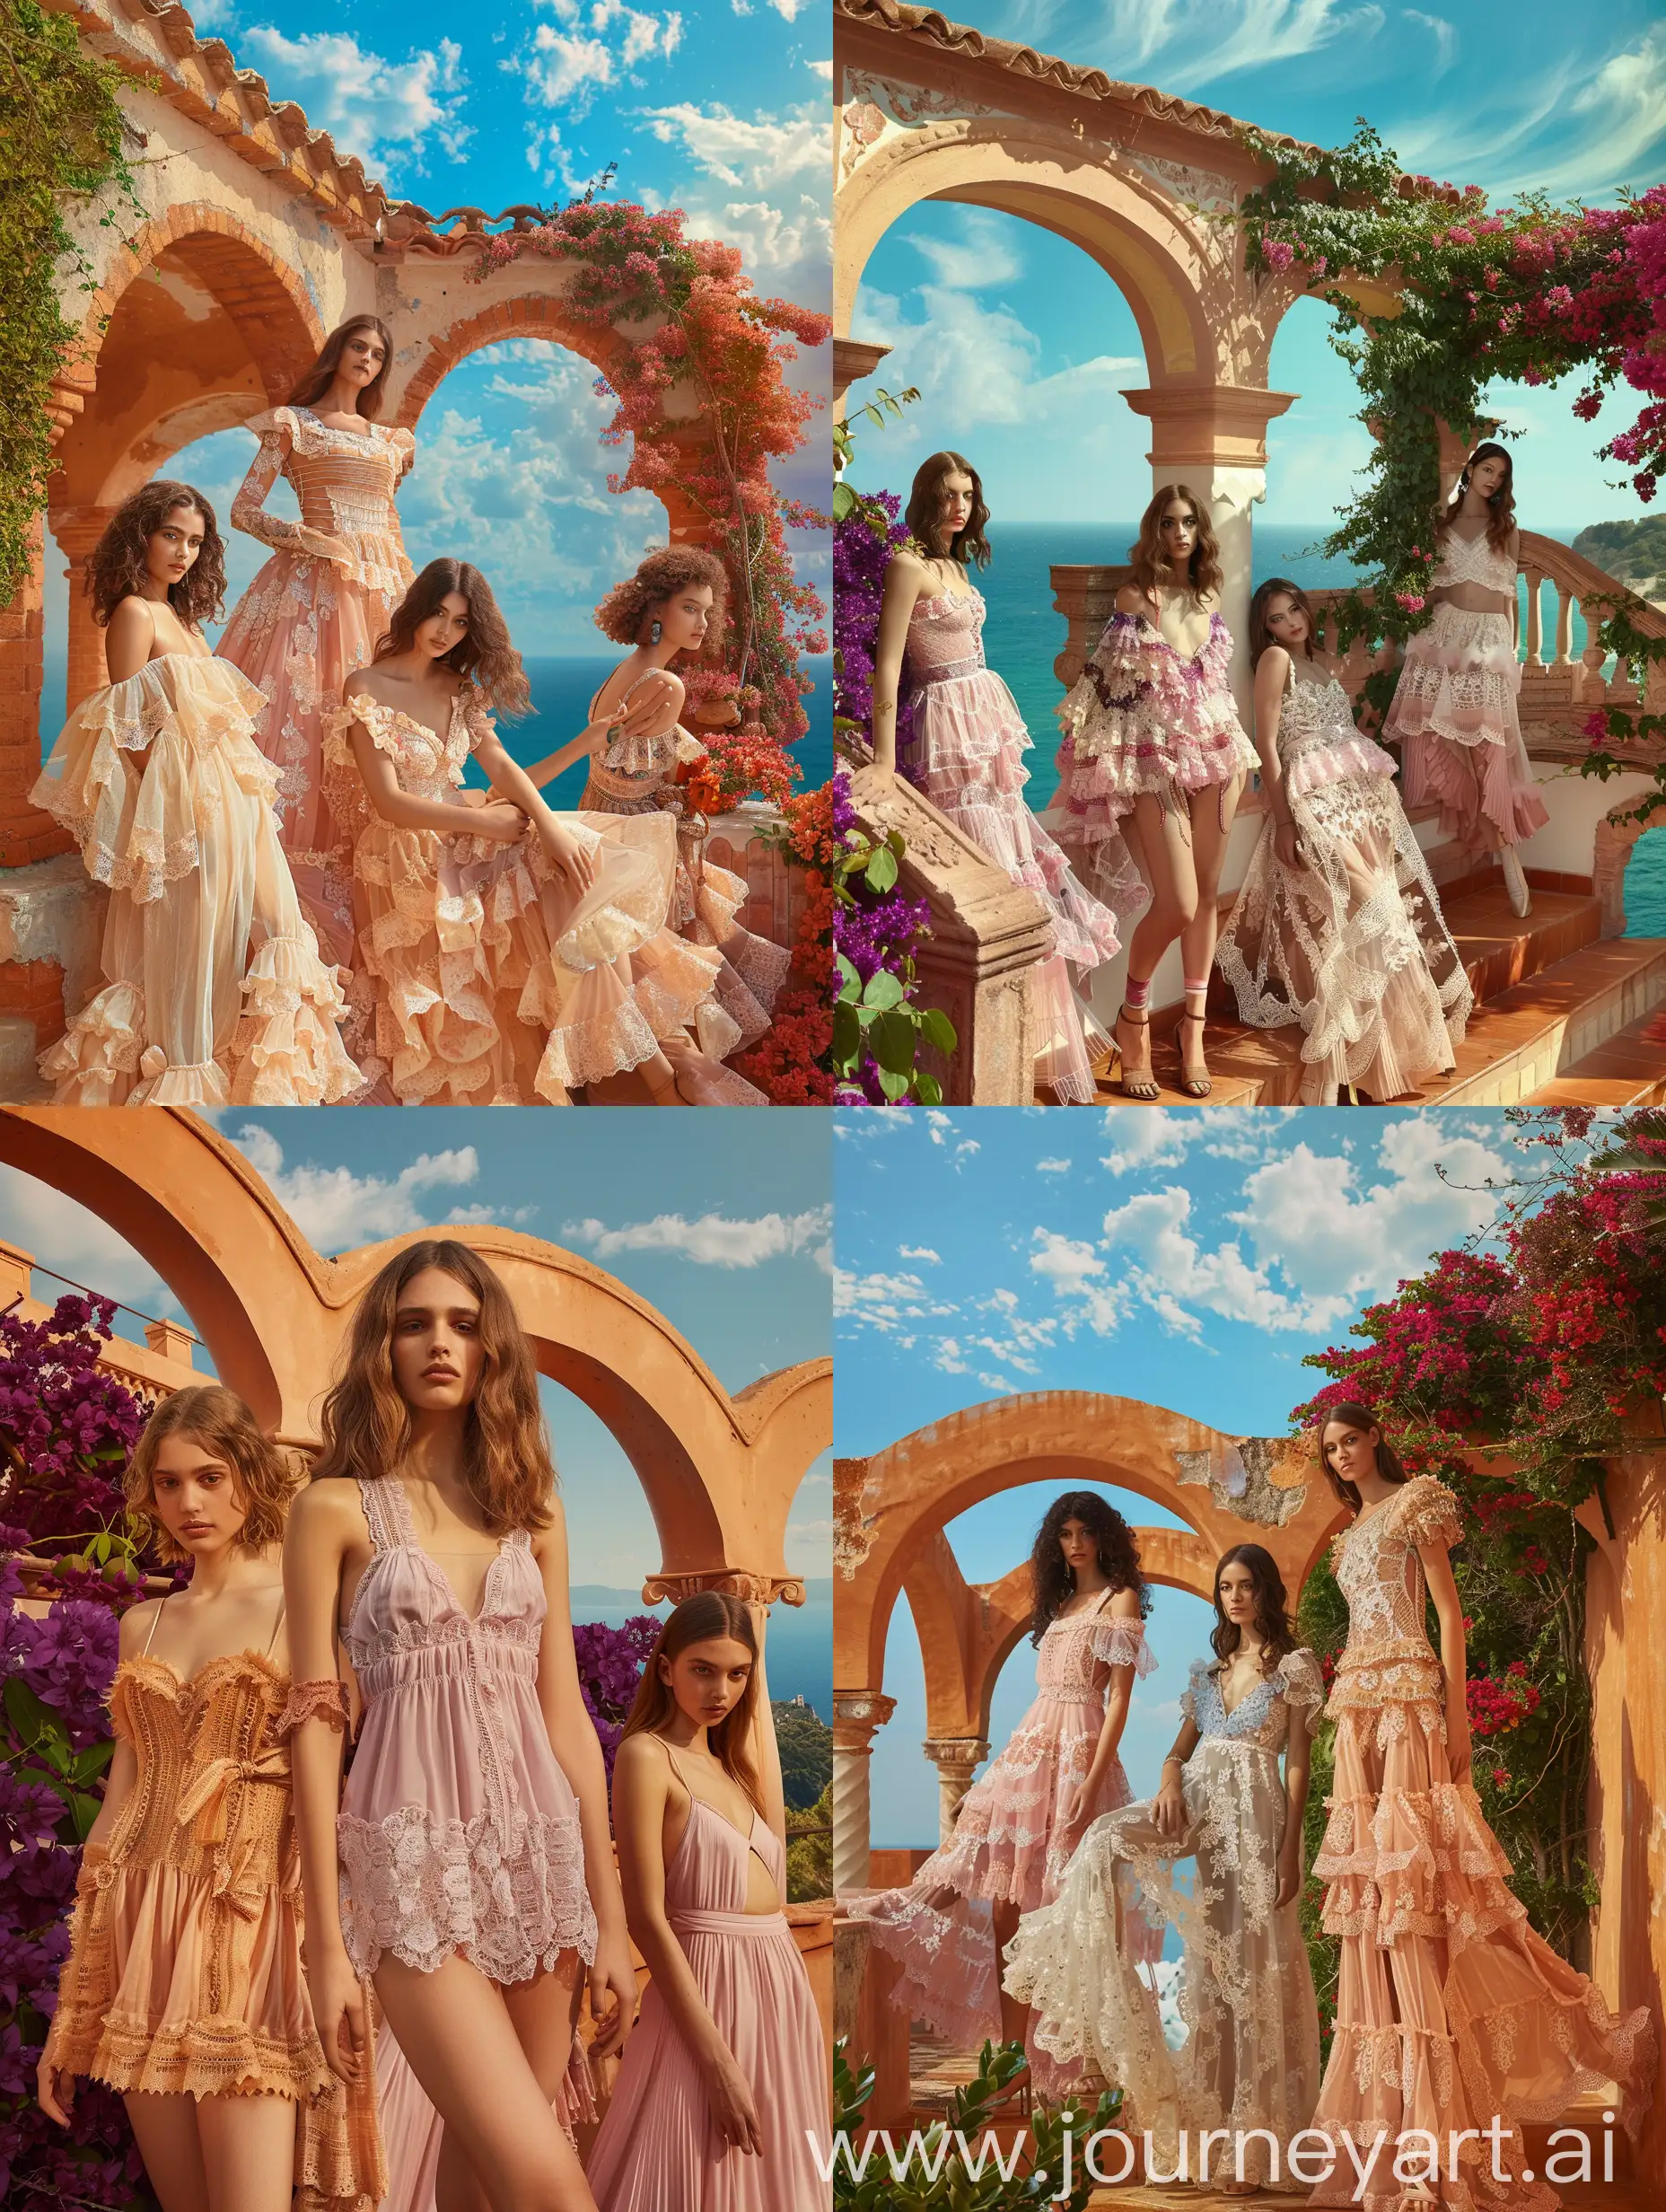 A realistic image captures the romance of a sun-drenched Mediterranean villa, where models pose amidst terracotta arches and flowering bougainvillea, wearing a fashion collection inspired by old-world charm and timeless elegance. Garments feature flowing silhouettes, delicate lacework, and sun-kissed hues, evoking the relaxed glamour of coastal living. Against the backdrop of azure skies and sparkling seas, the collection exudes a sense of luxury and sophistication, inviting viewers to escape to a world of timeless beauty